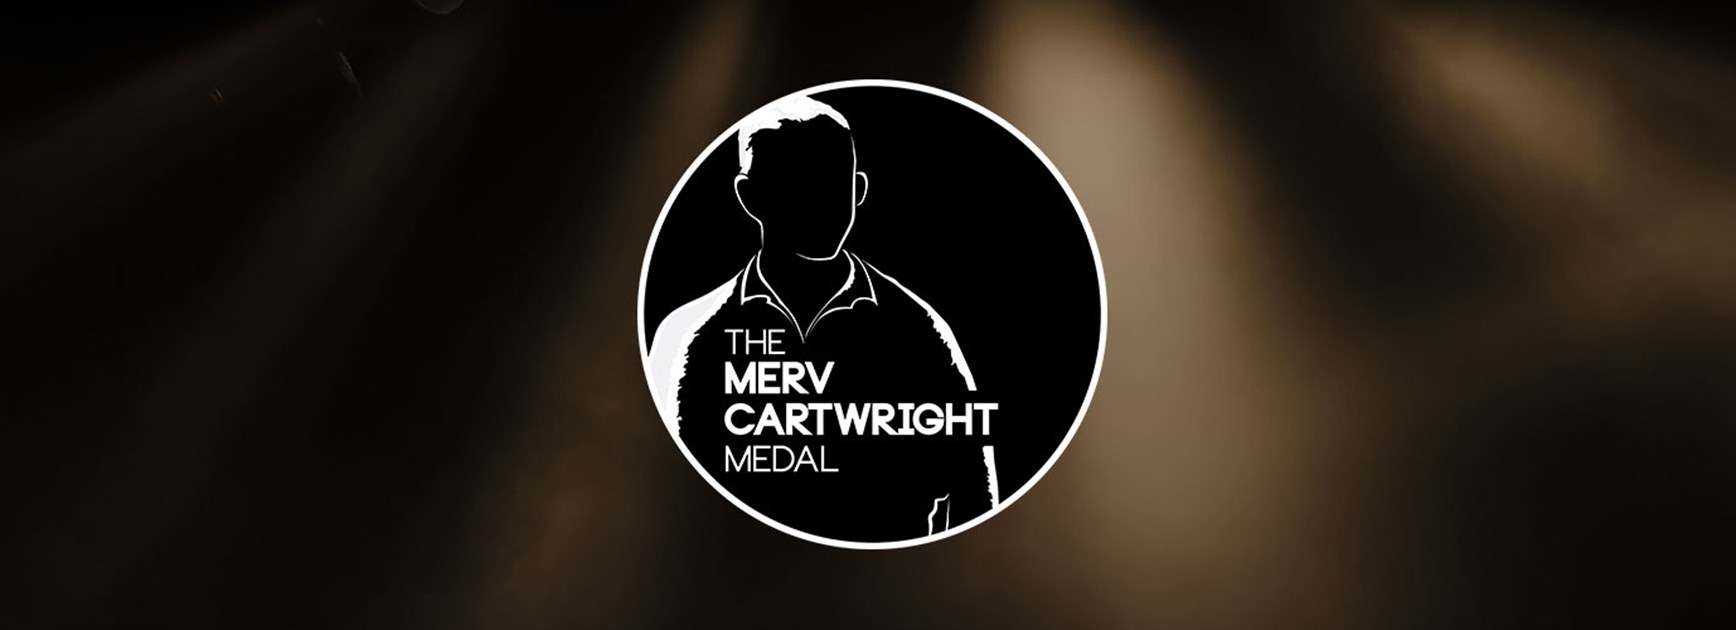 Watch the 2020 Merv Cartwright Medal broadcast